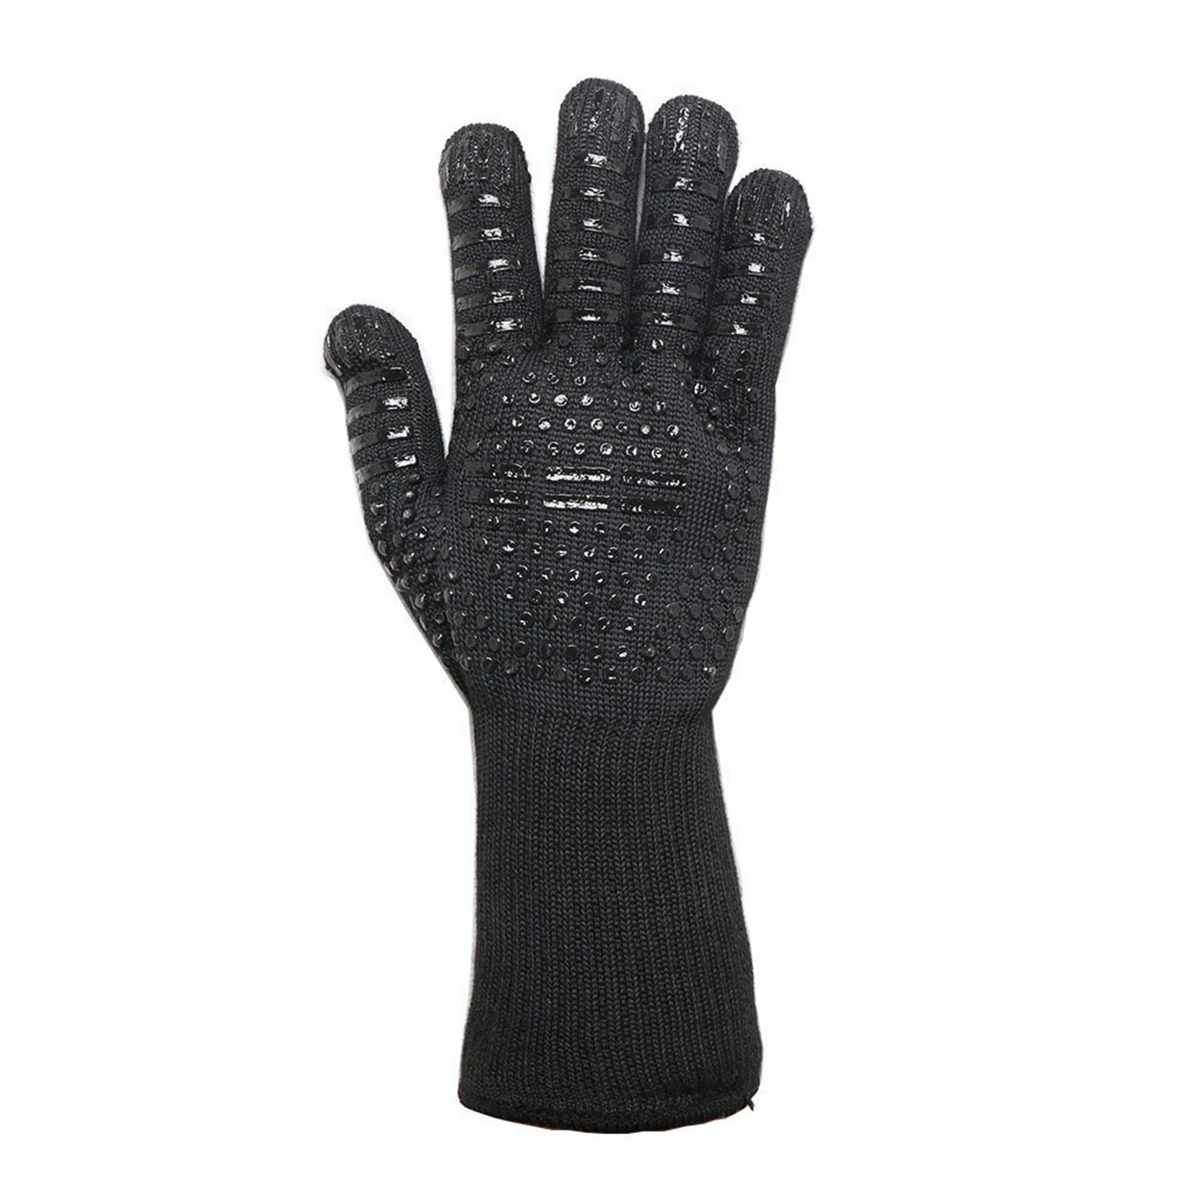 Silicone-Extreme-500-Heat-Resistant-Glove-Cooking-Oven-Hot-Mitt-BBQ-Grilling-Glove-1375771